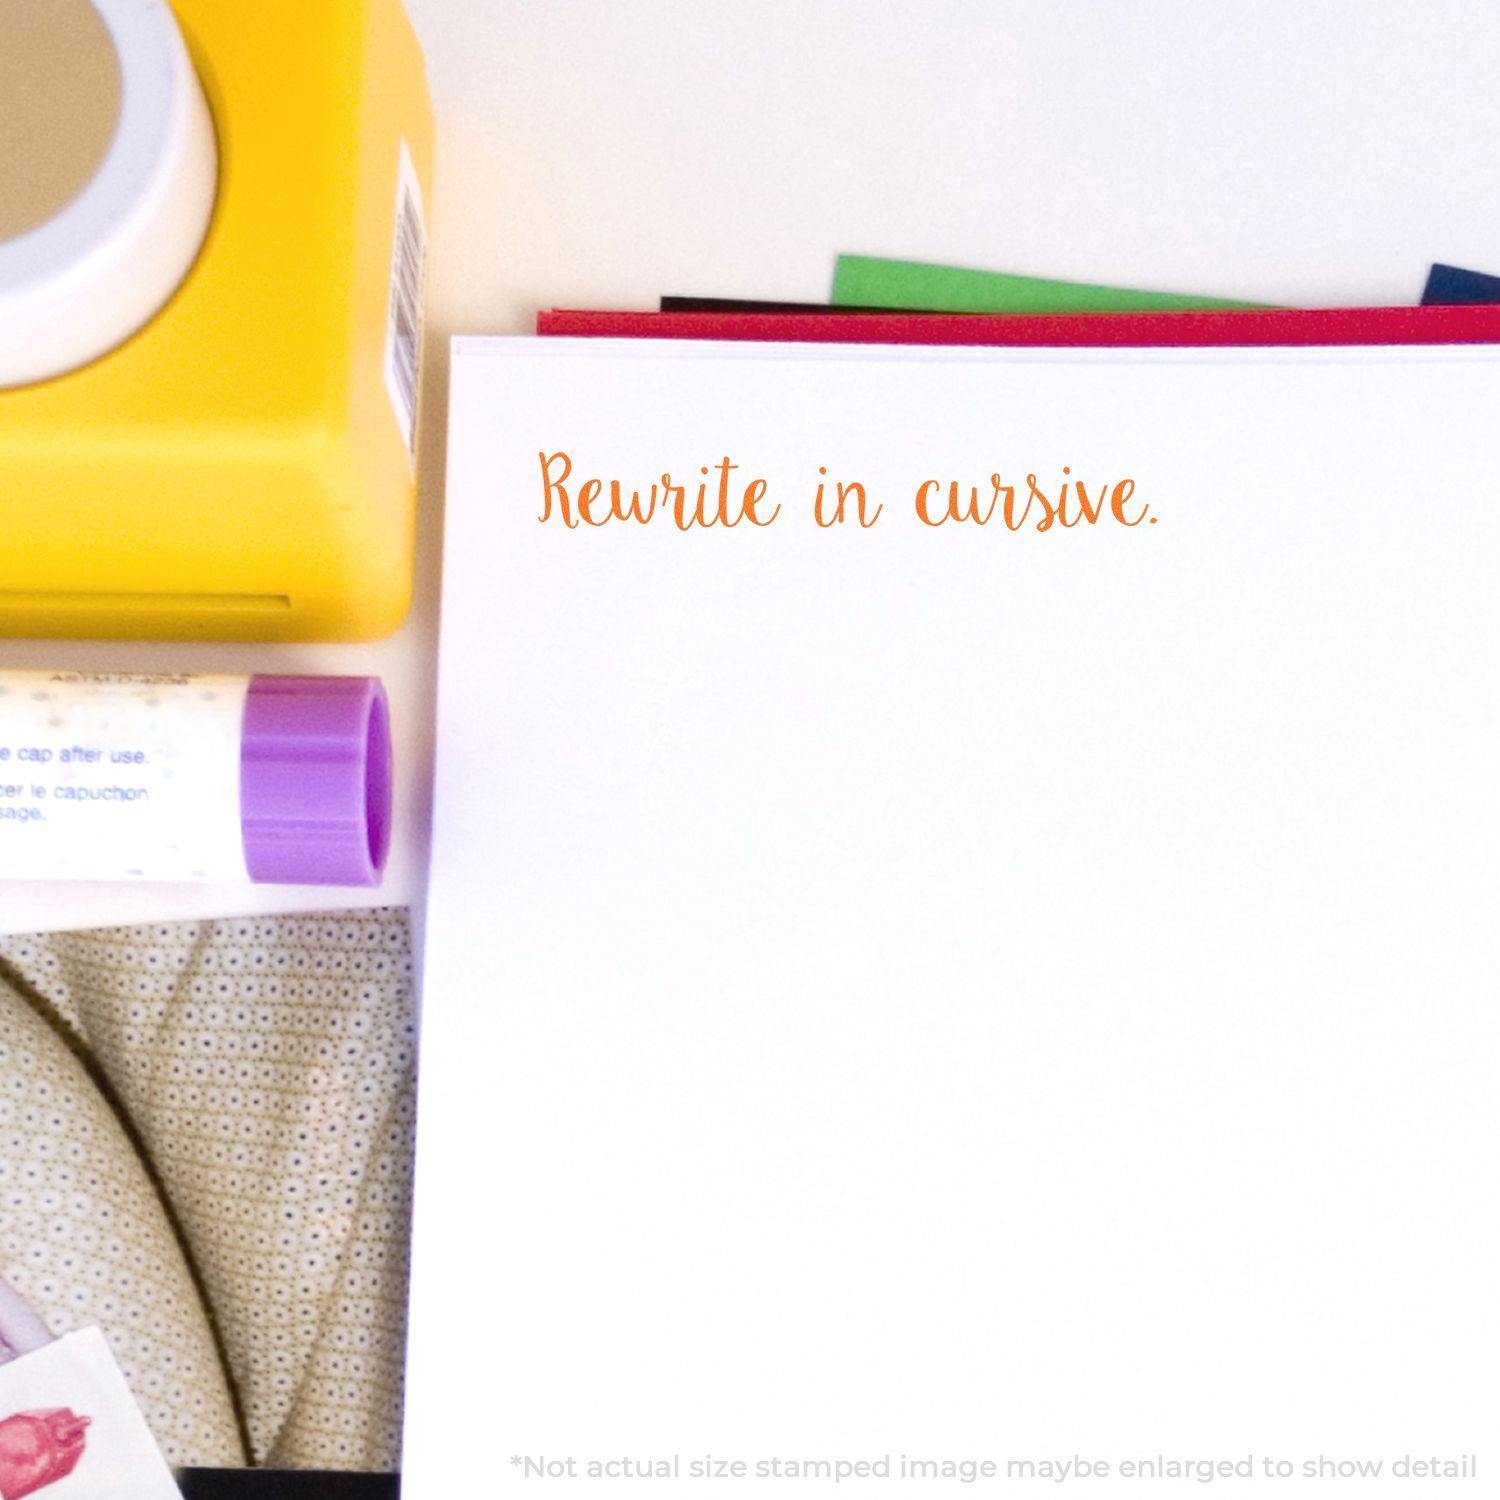 A self-inking stamp with a stamped image showing how the text "Rewrite in cursive." (in a script cursive font) is displayed after stamping.